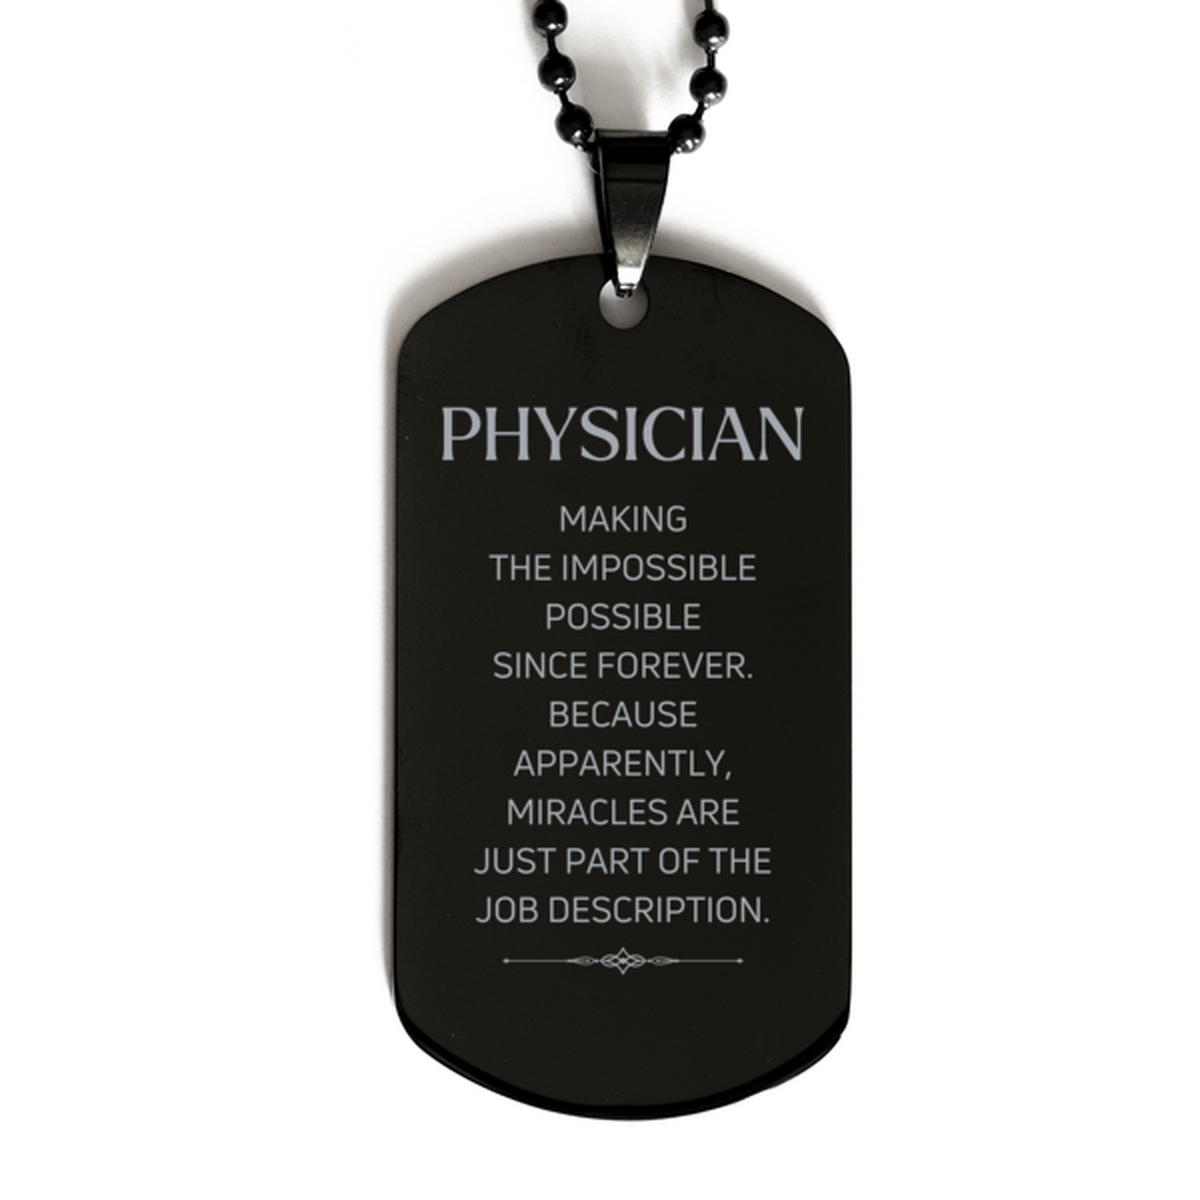 Funny Physician Gifts, Miracles are just part of the job description, Inspirational Birthday Black Dog Tag For Physician, Men, Women, Coworkers, Friends, Boss